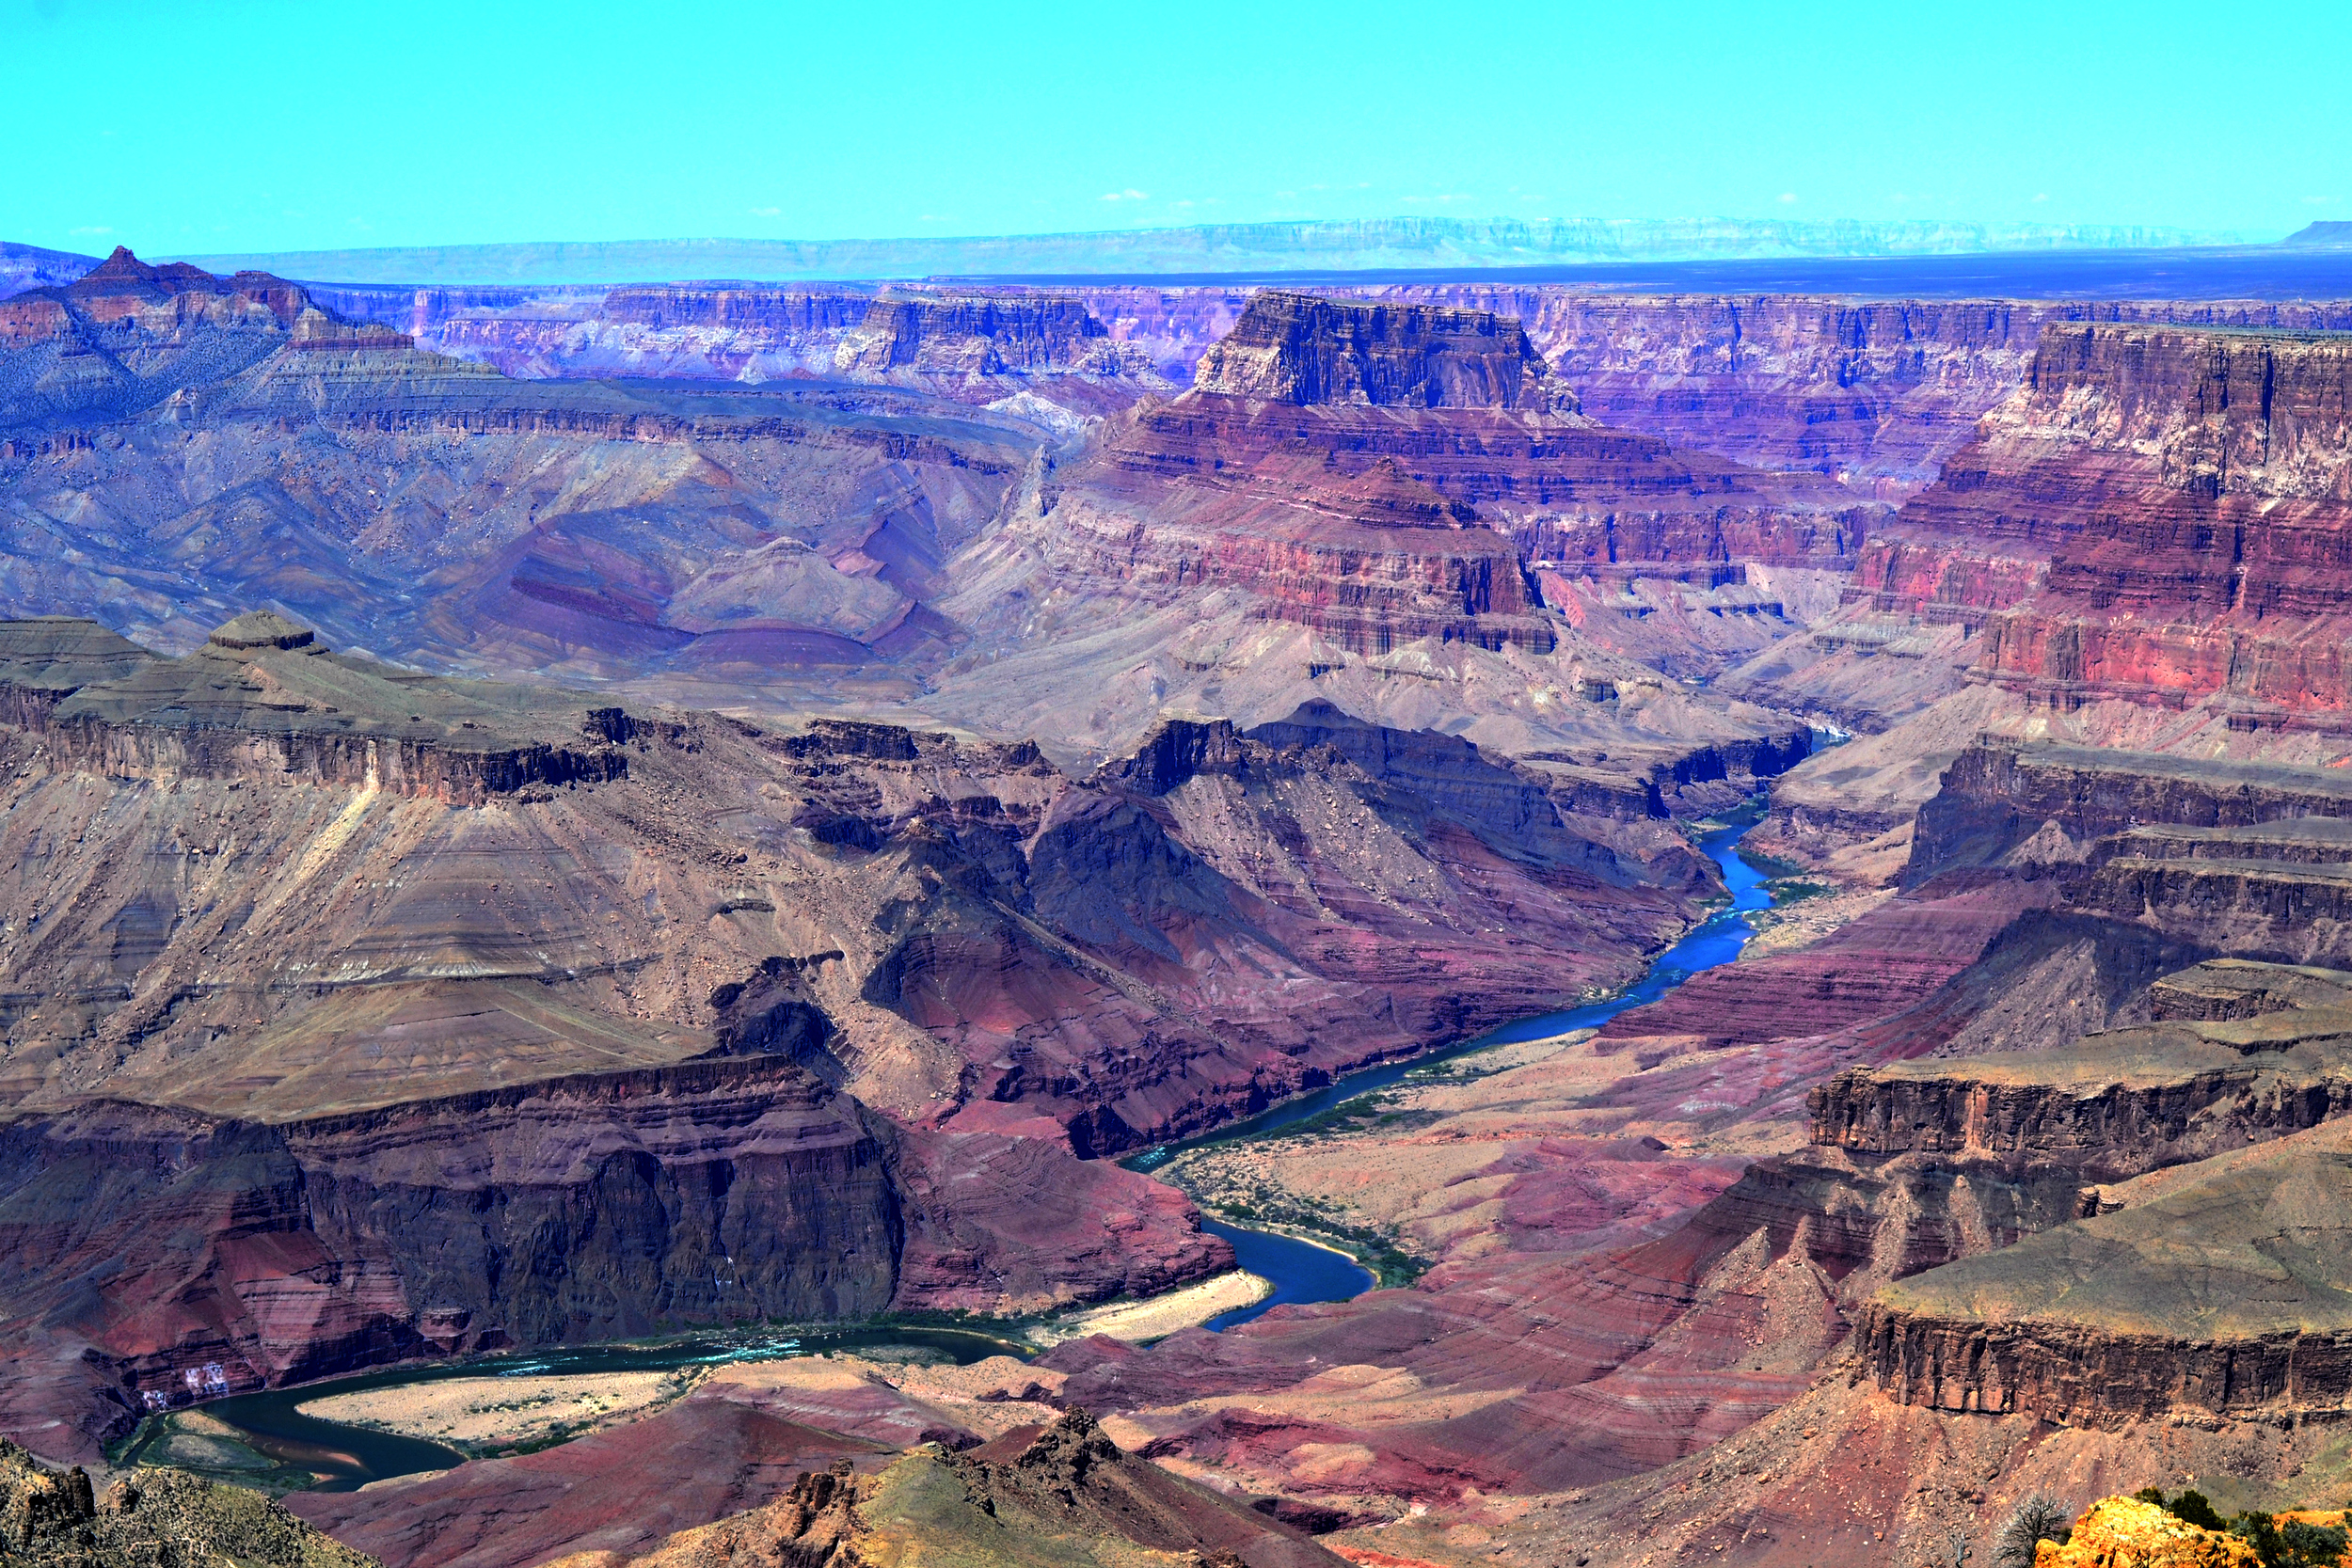 The Grand Canyon, again. Can you believe that tiny little river formed this massive natural wonder?